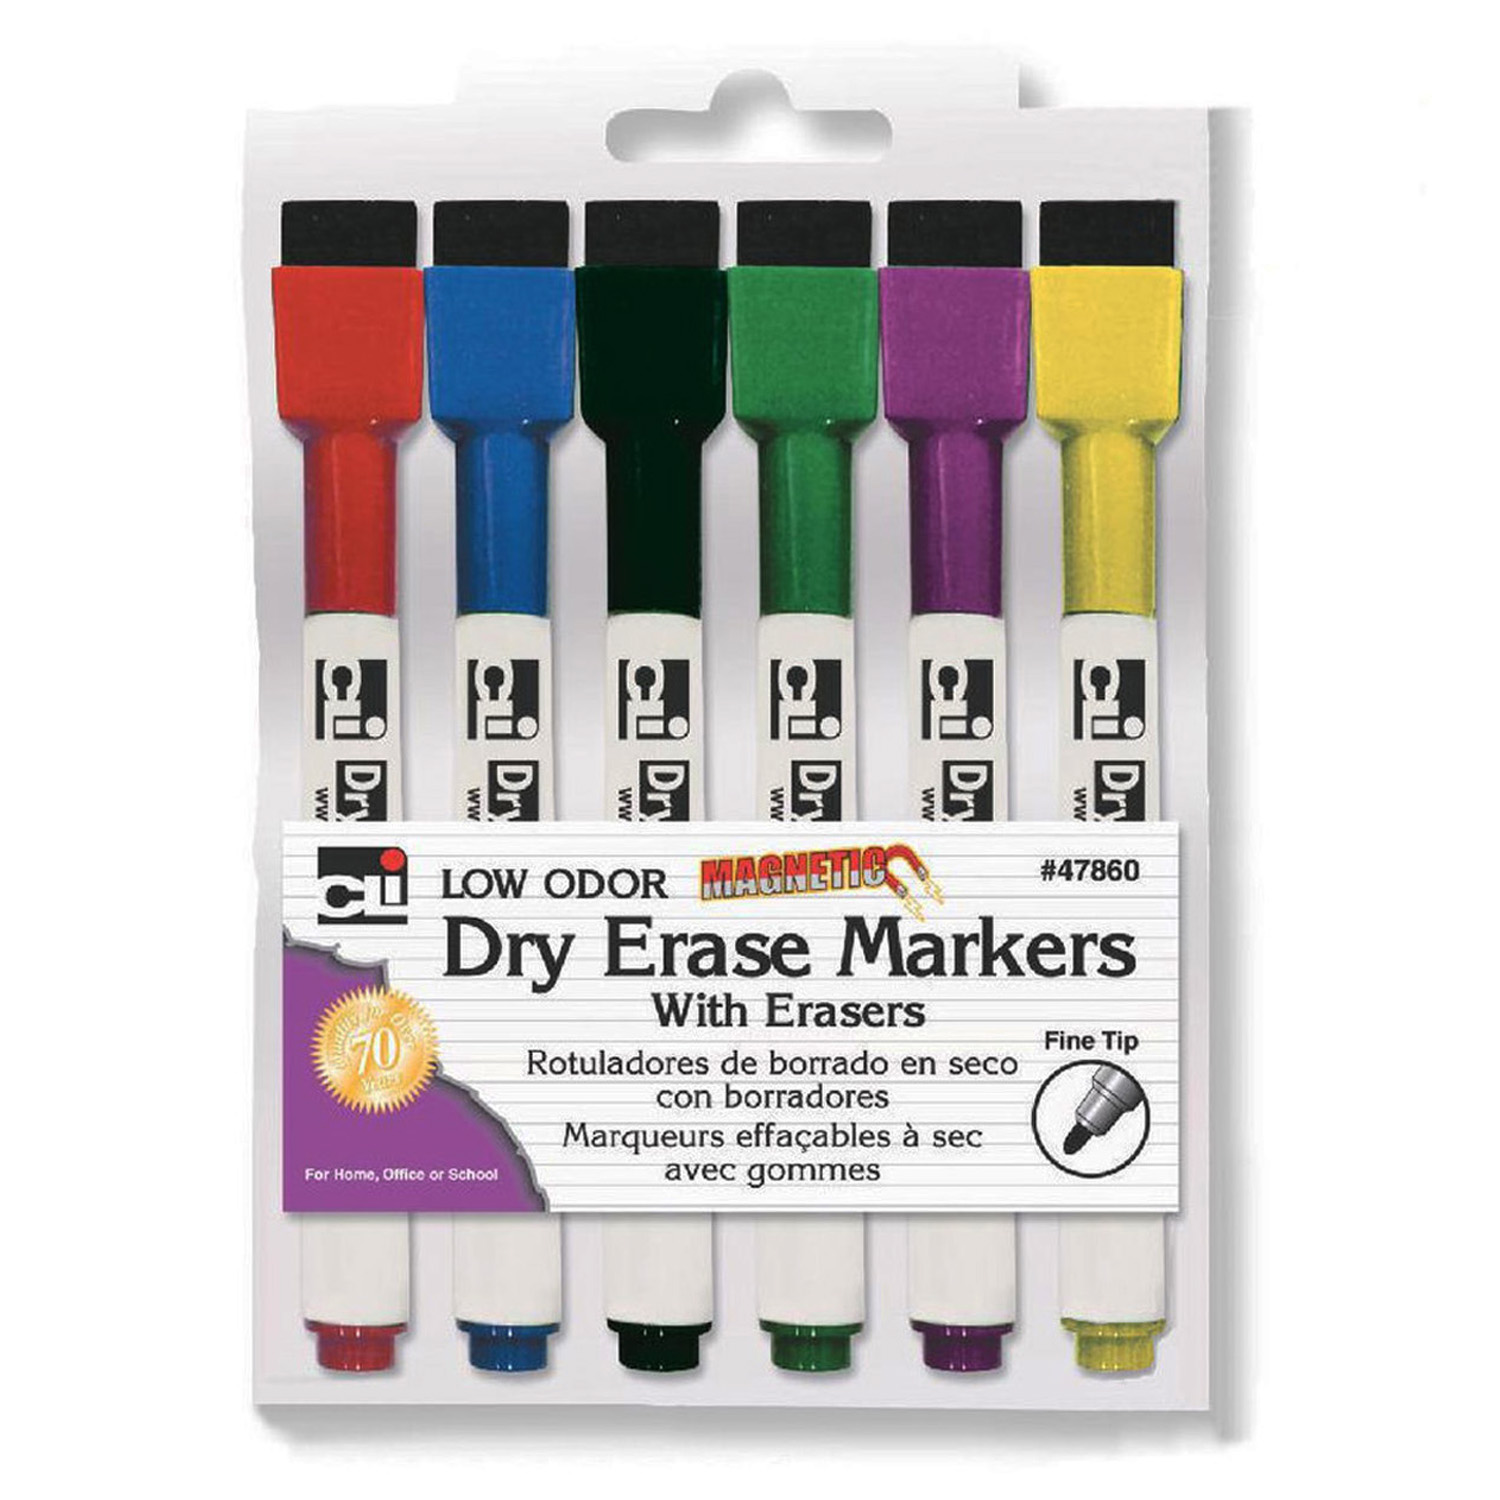 Magnetic Dry Erase Markers with Erasers, Pack of 6